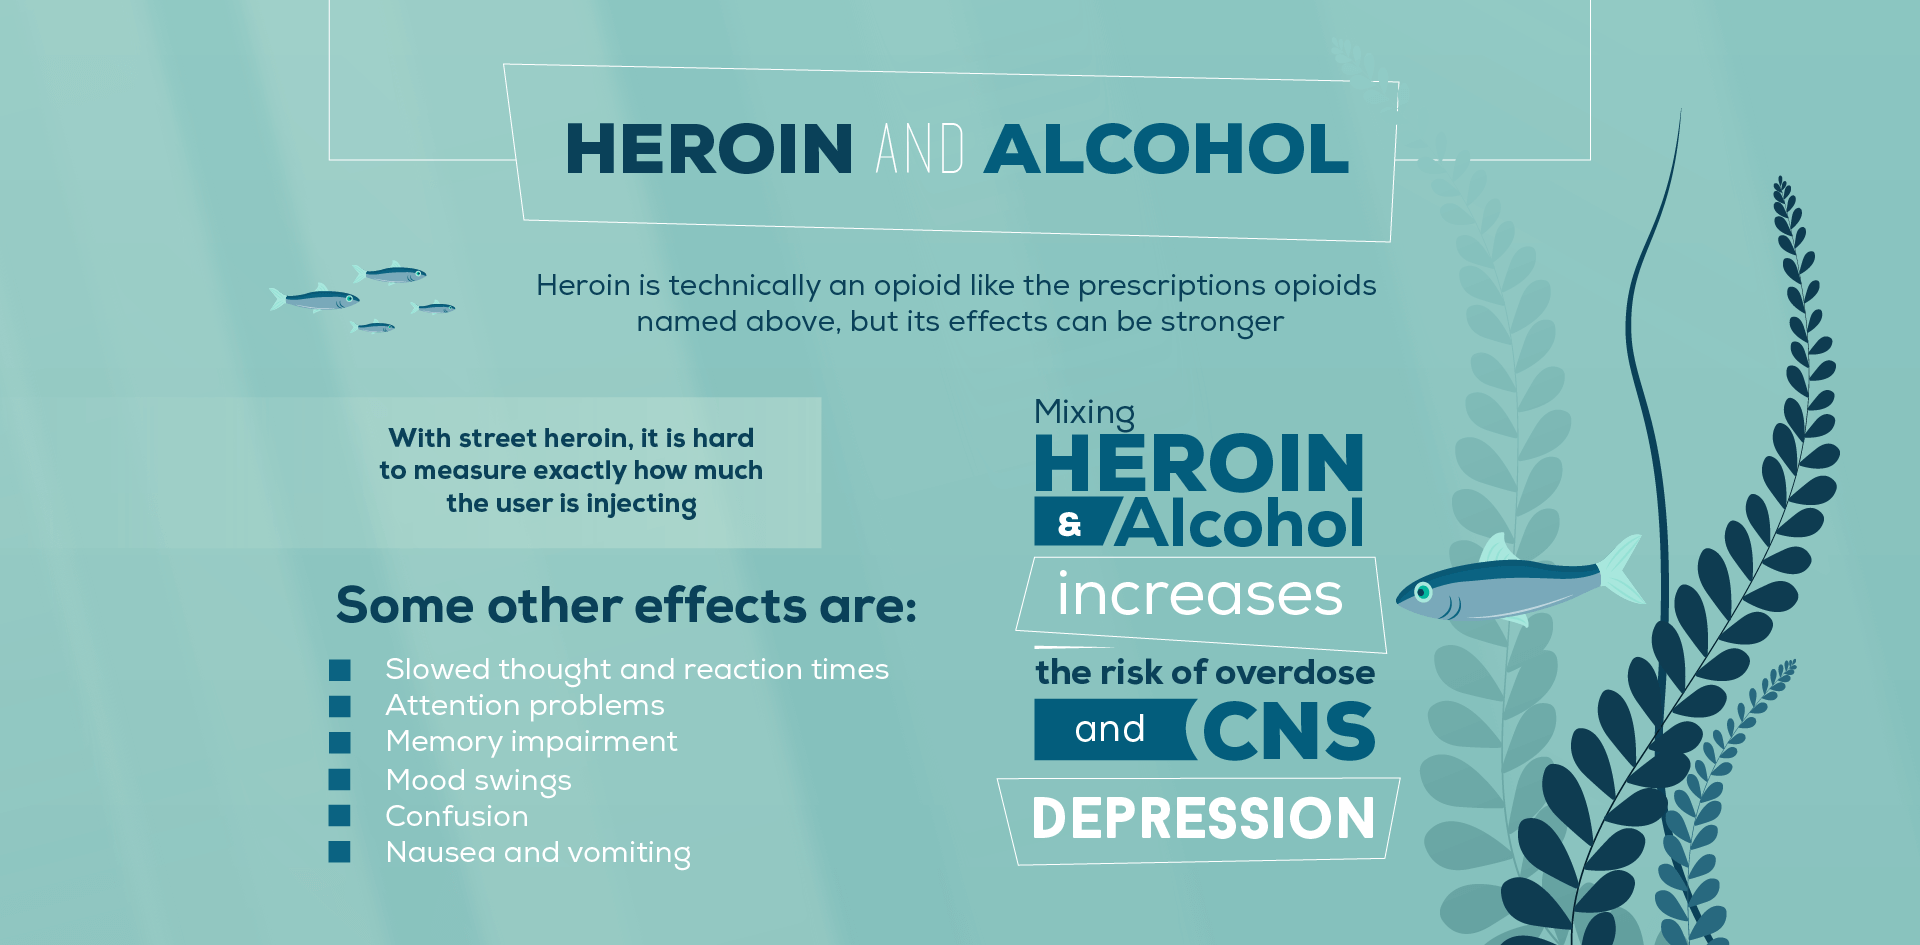 Heroin and Alcohol